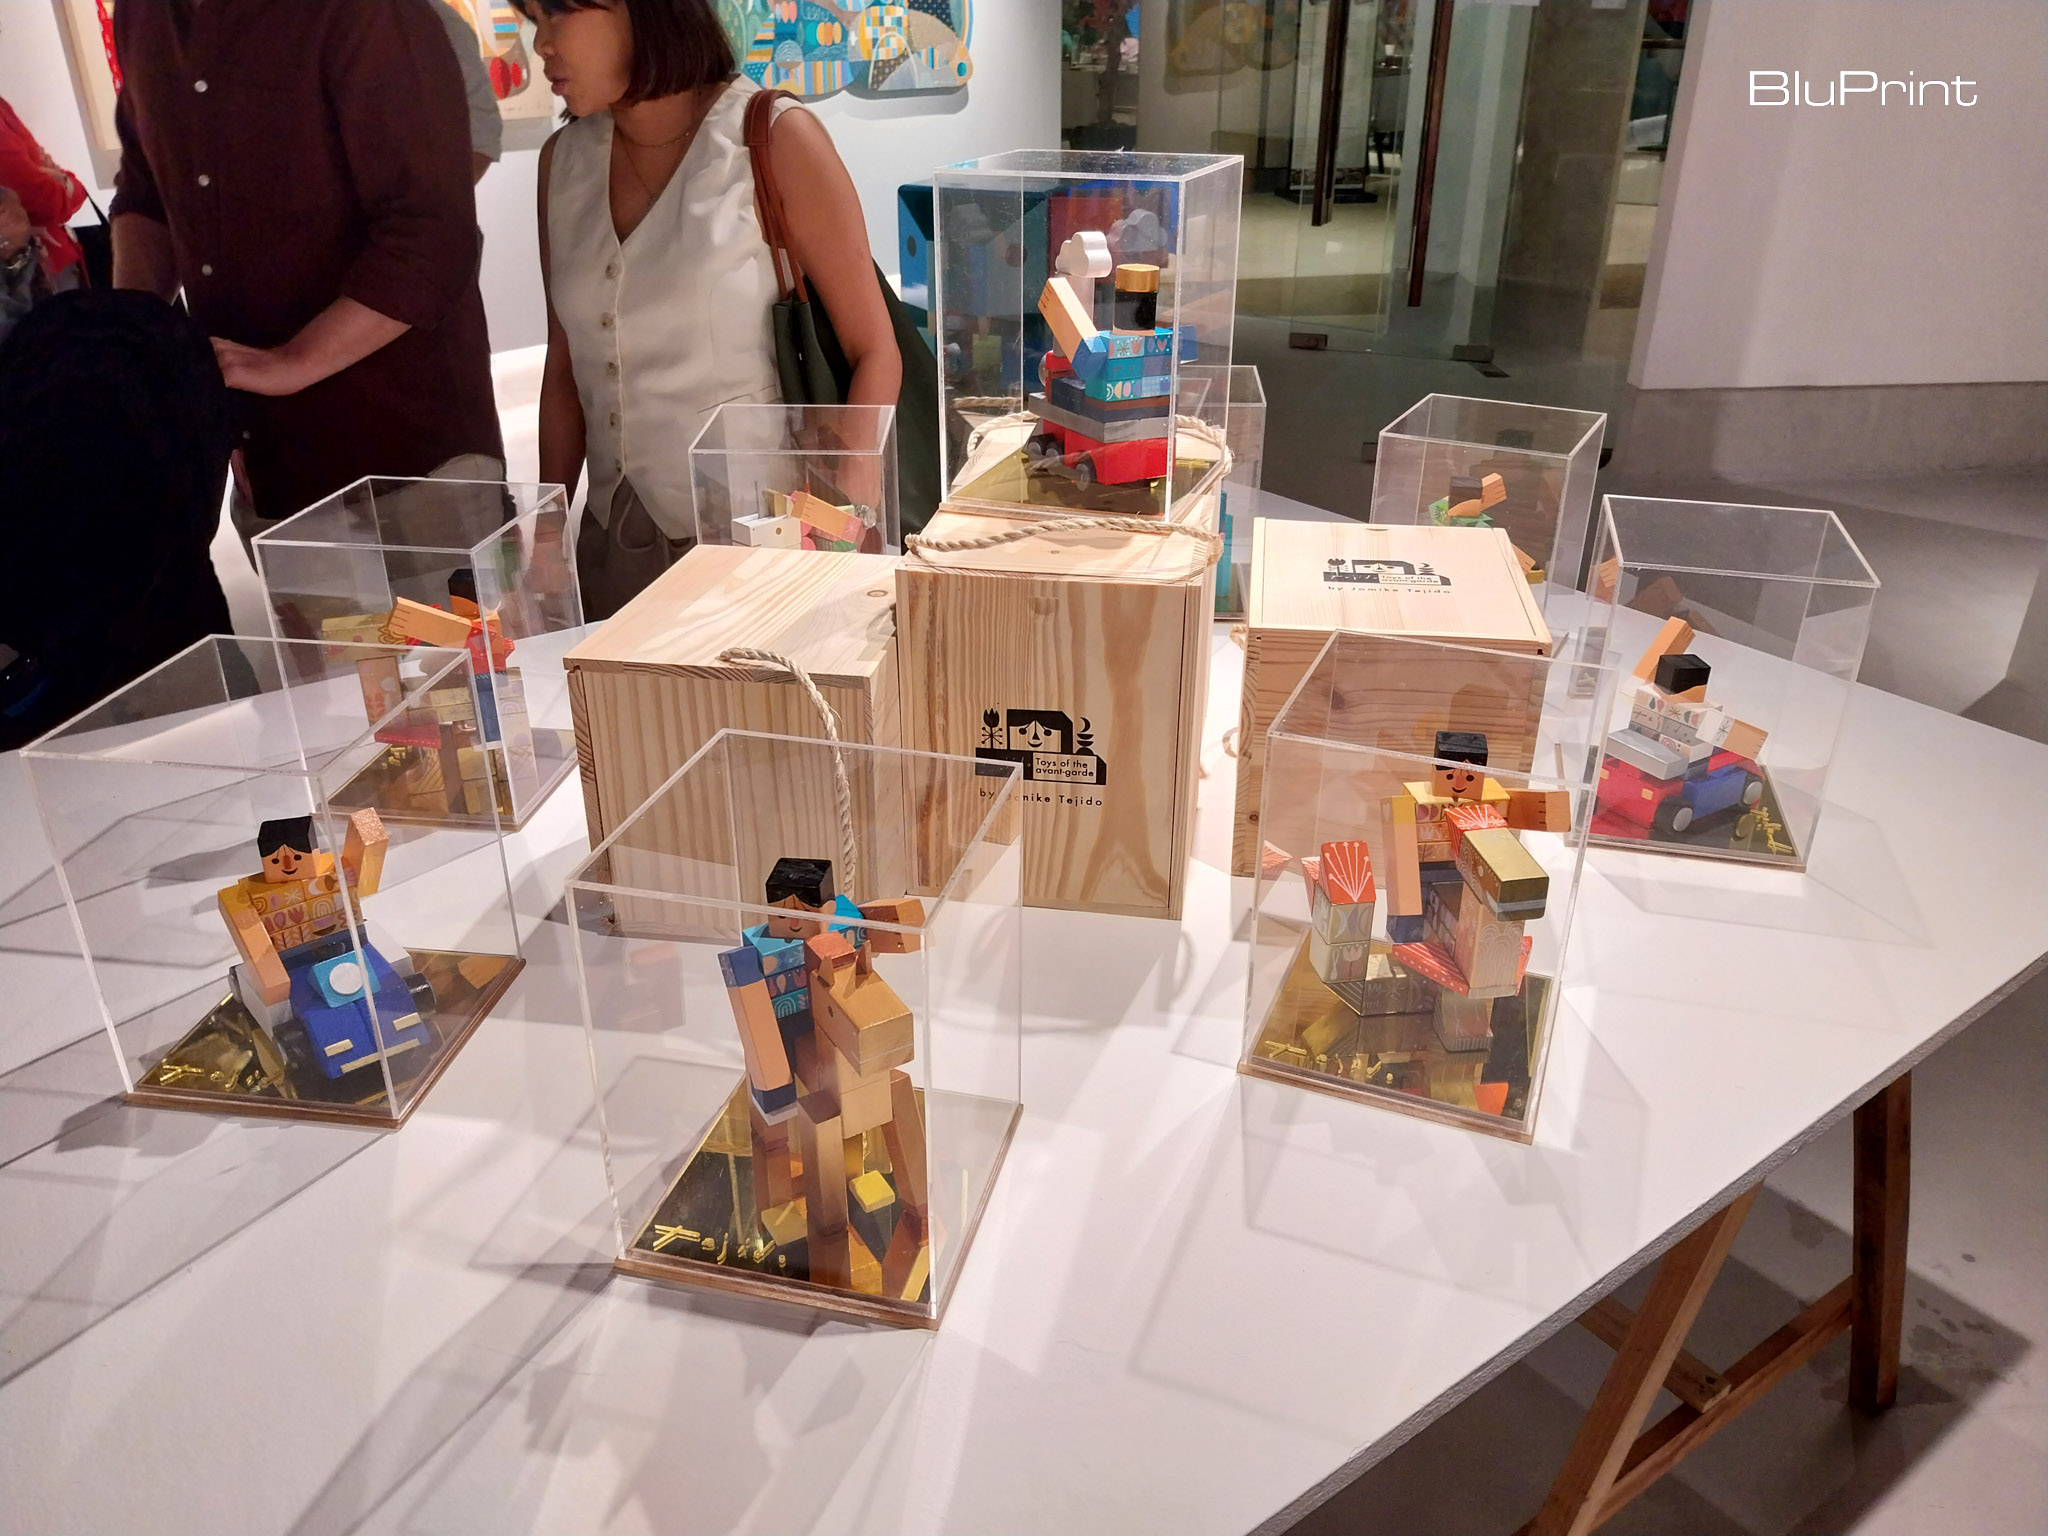 "Toys of the Abstract" from Jomike Tejido's exhibit. Photo by Elle Yap.